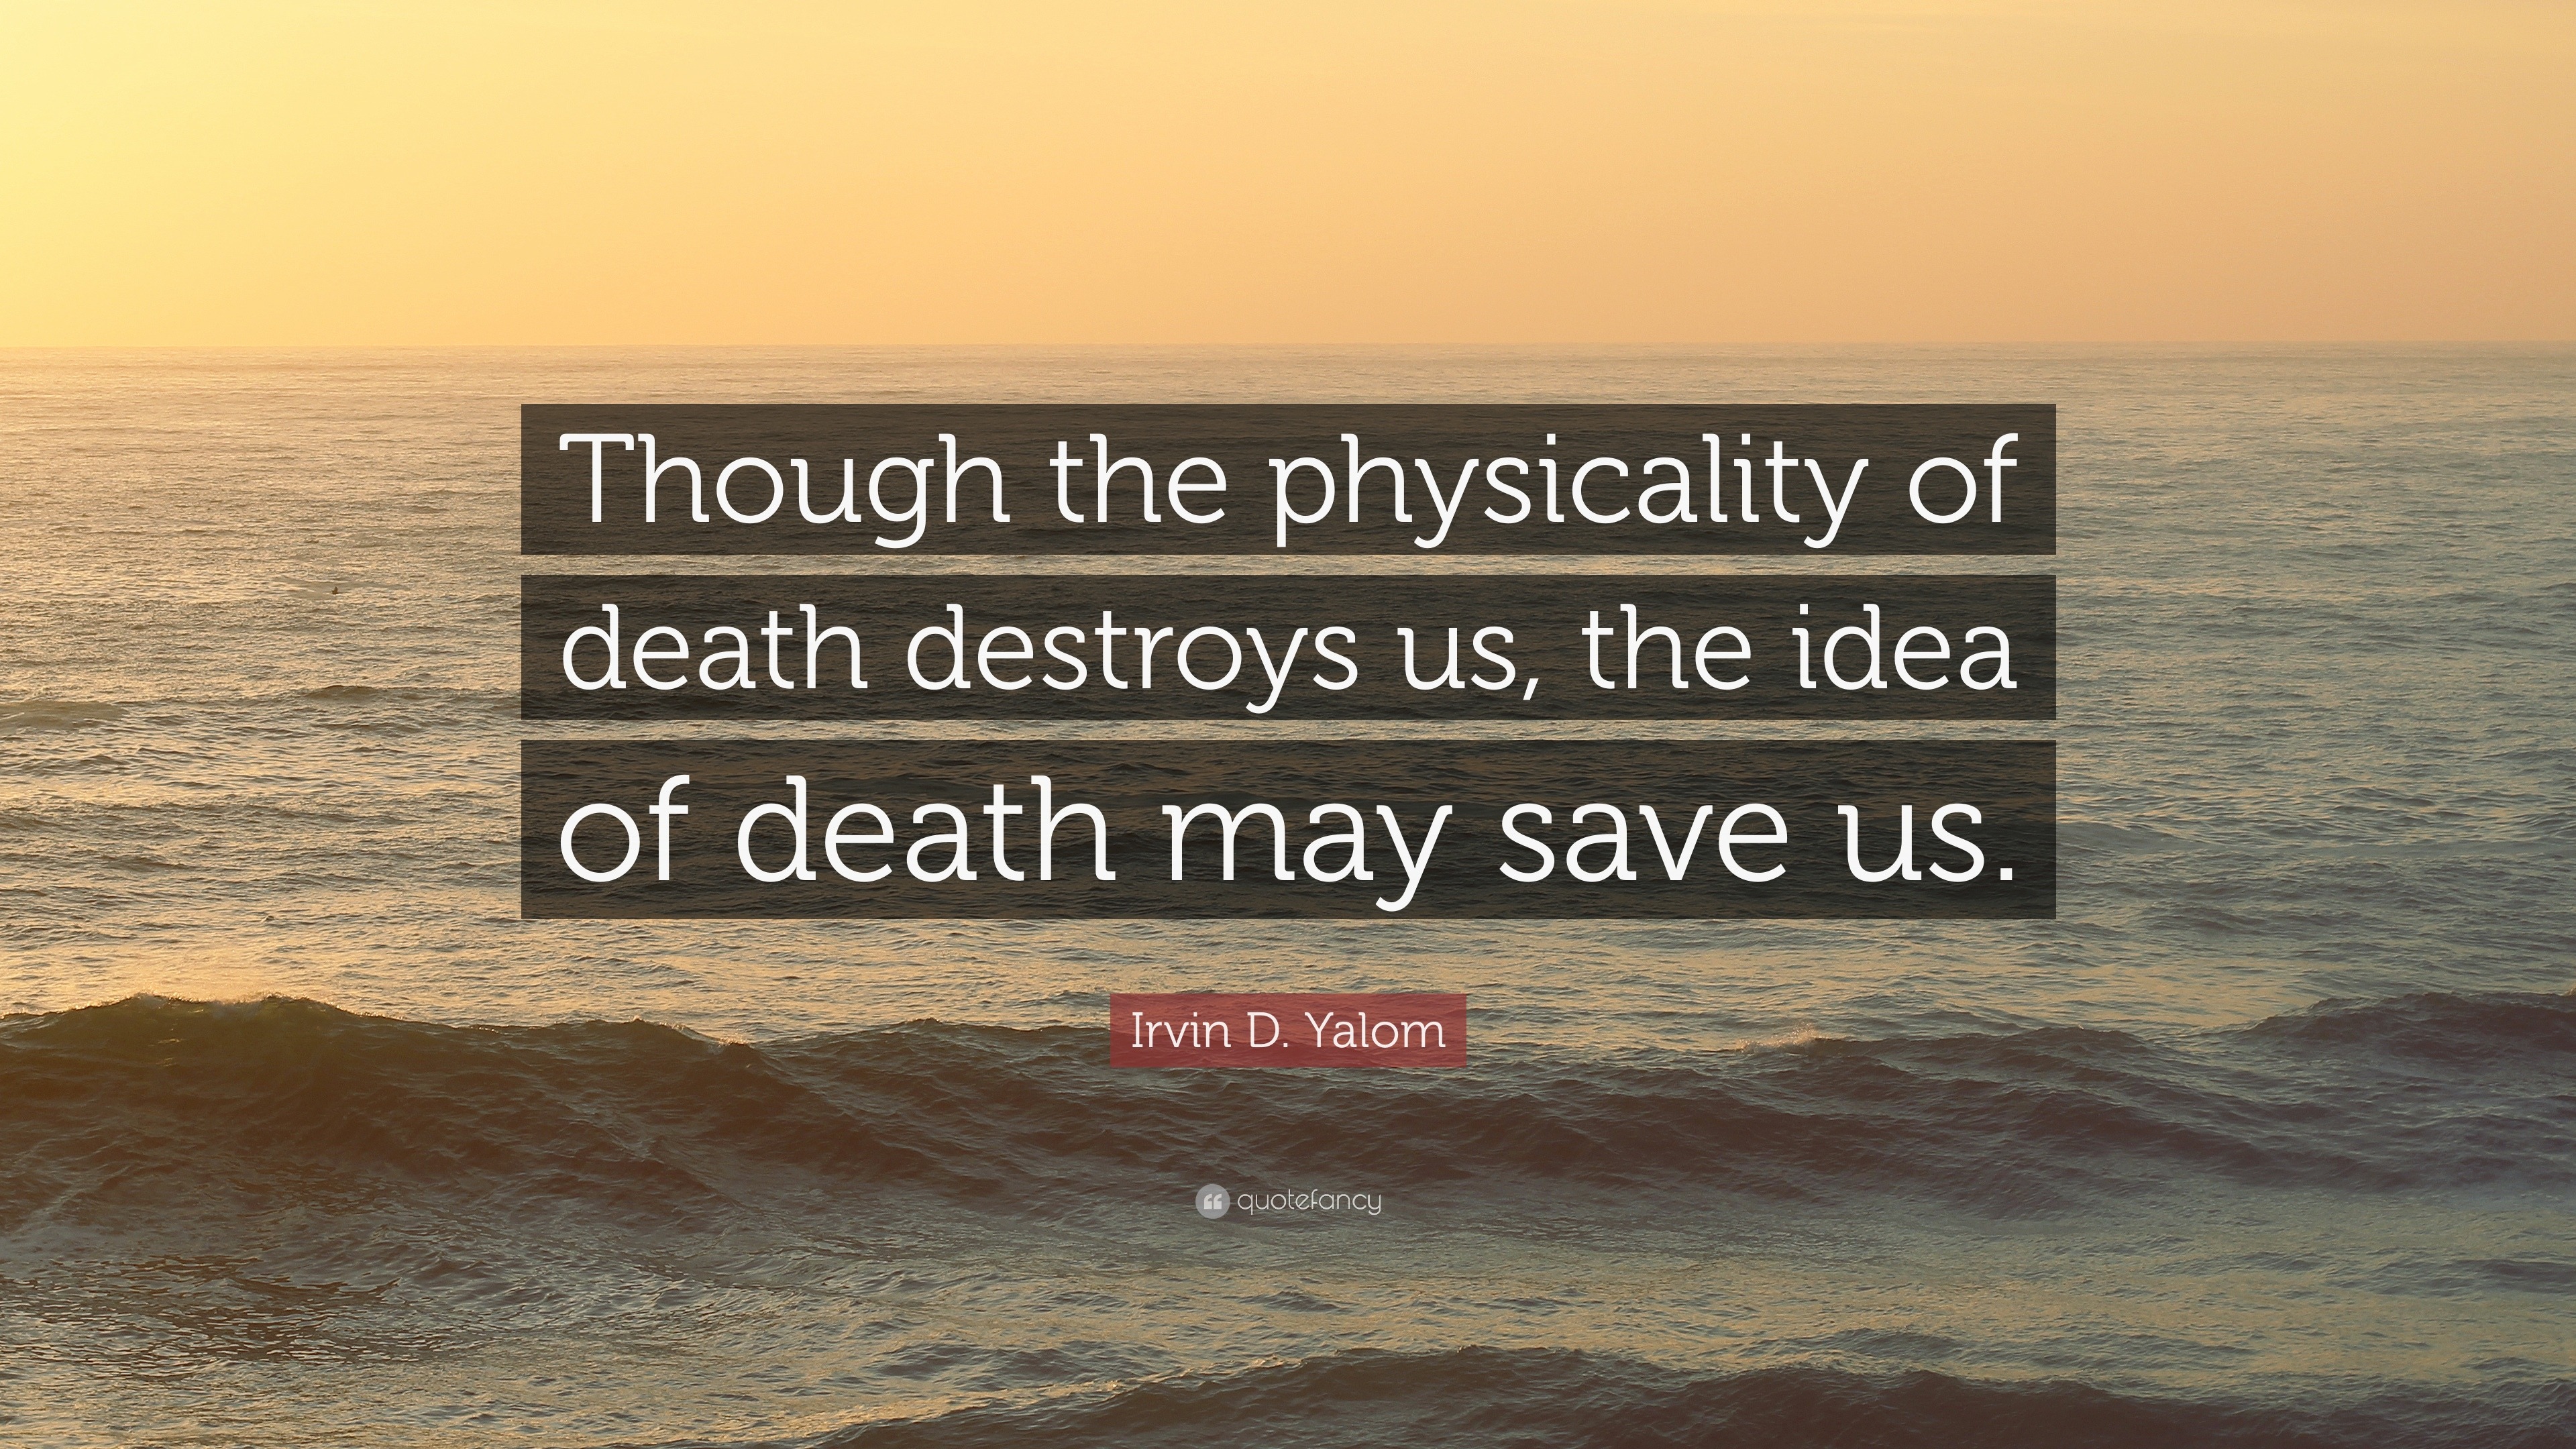 Irvin D Yalom Quote Though The Physicality Of Death Destroys Us The Idea Of Death May